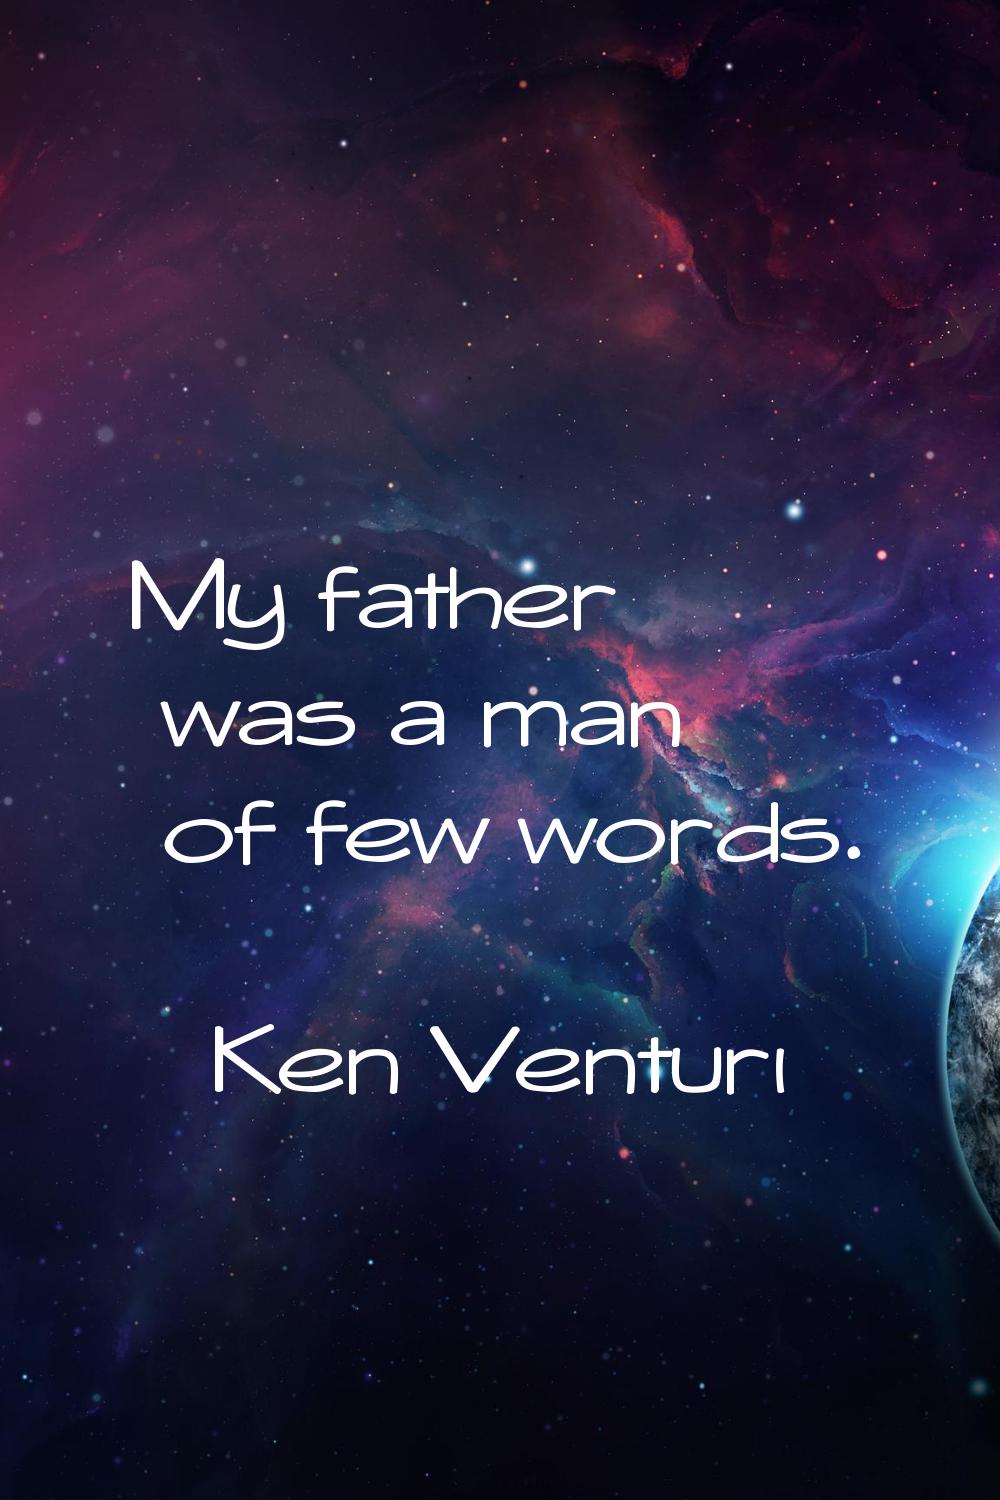 My father was a man of few words.